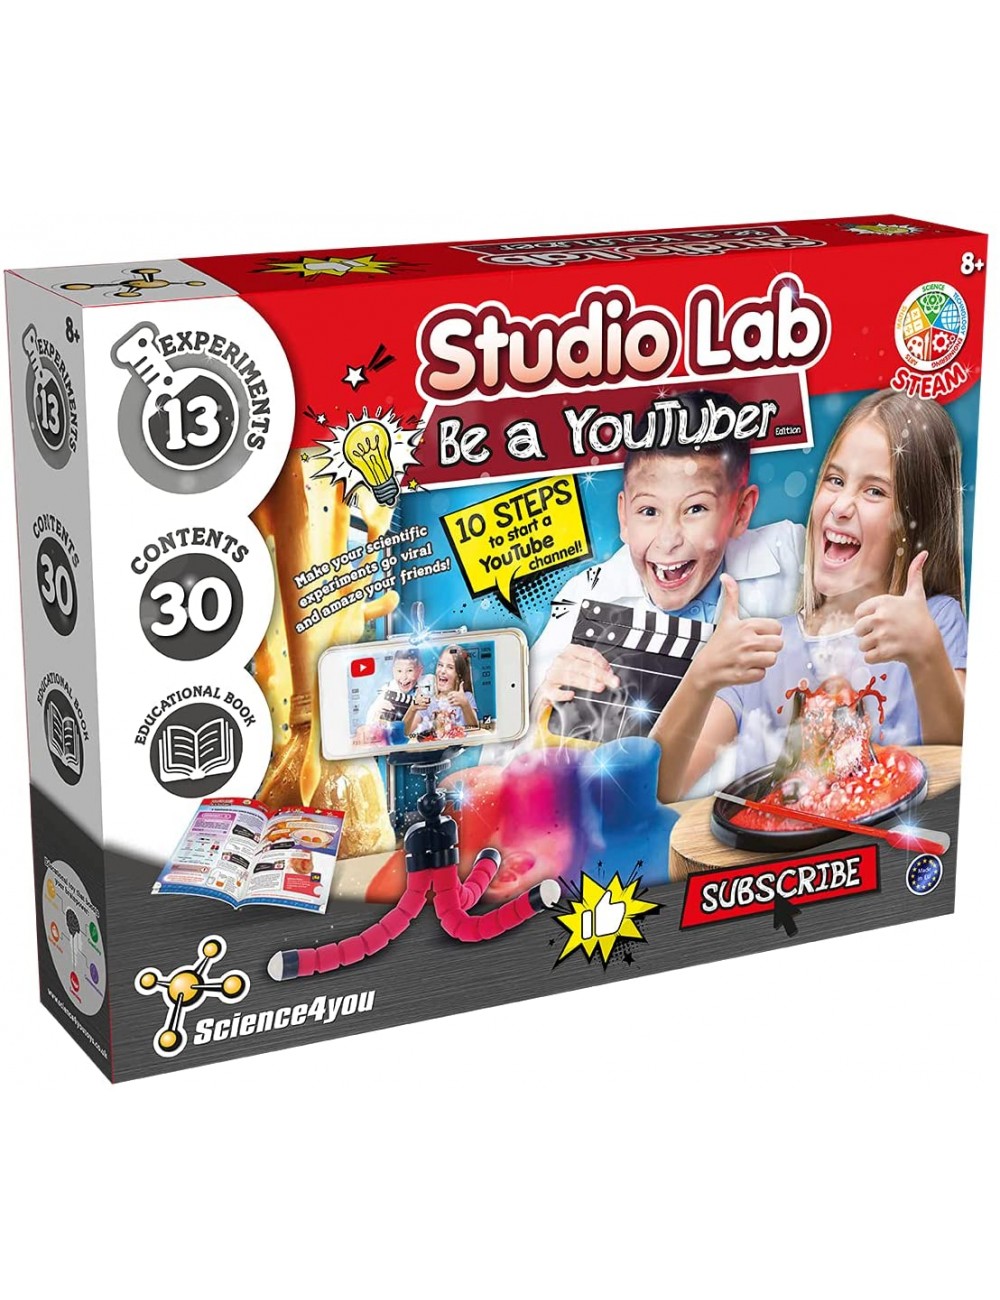 Educational STEM Experiments Set Science4You Studio Lab Be A Youtuber 